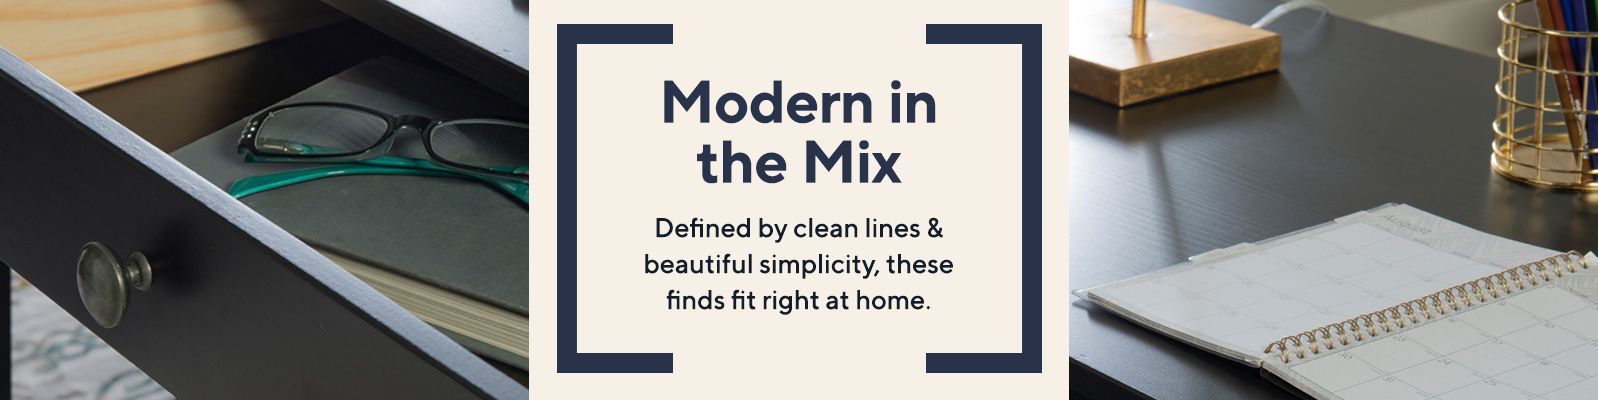 Modern in the Mix.  Defined by clean lines & beautiful simplicity, these finds fit right at home.